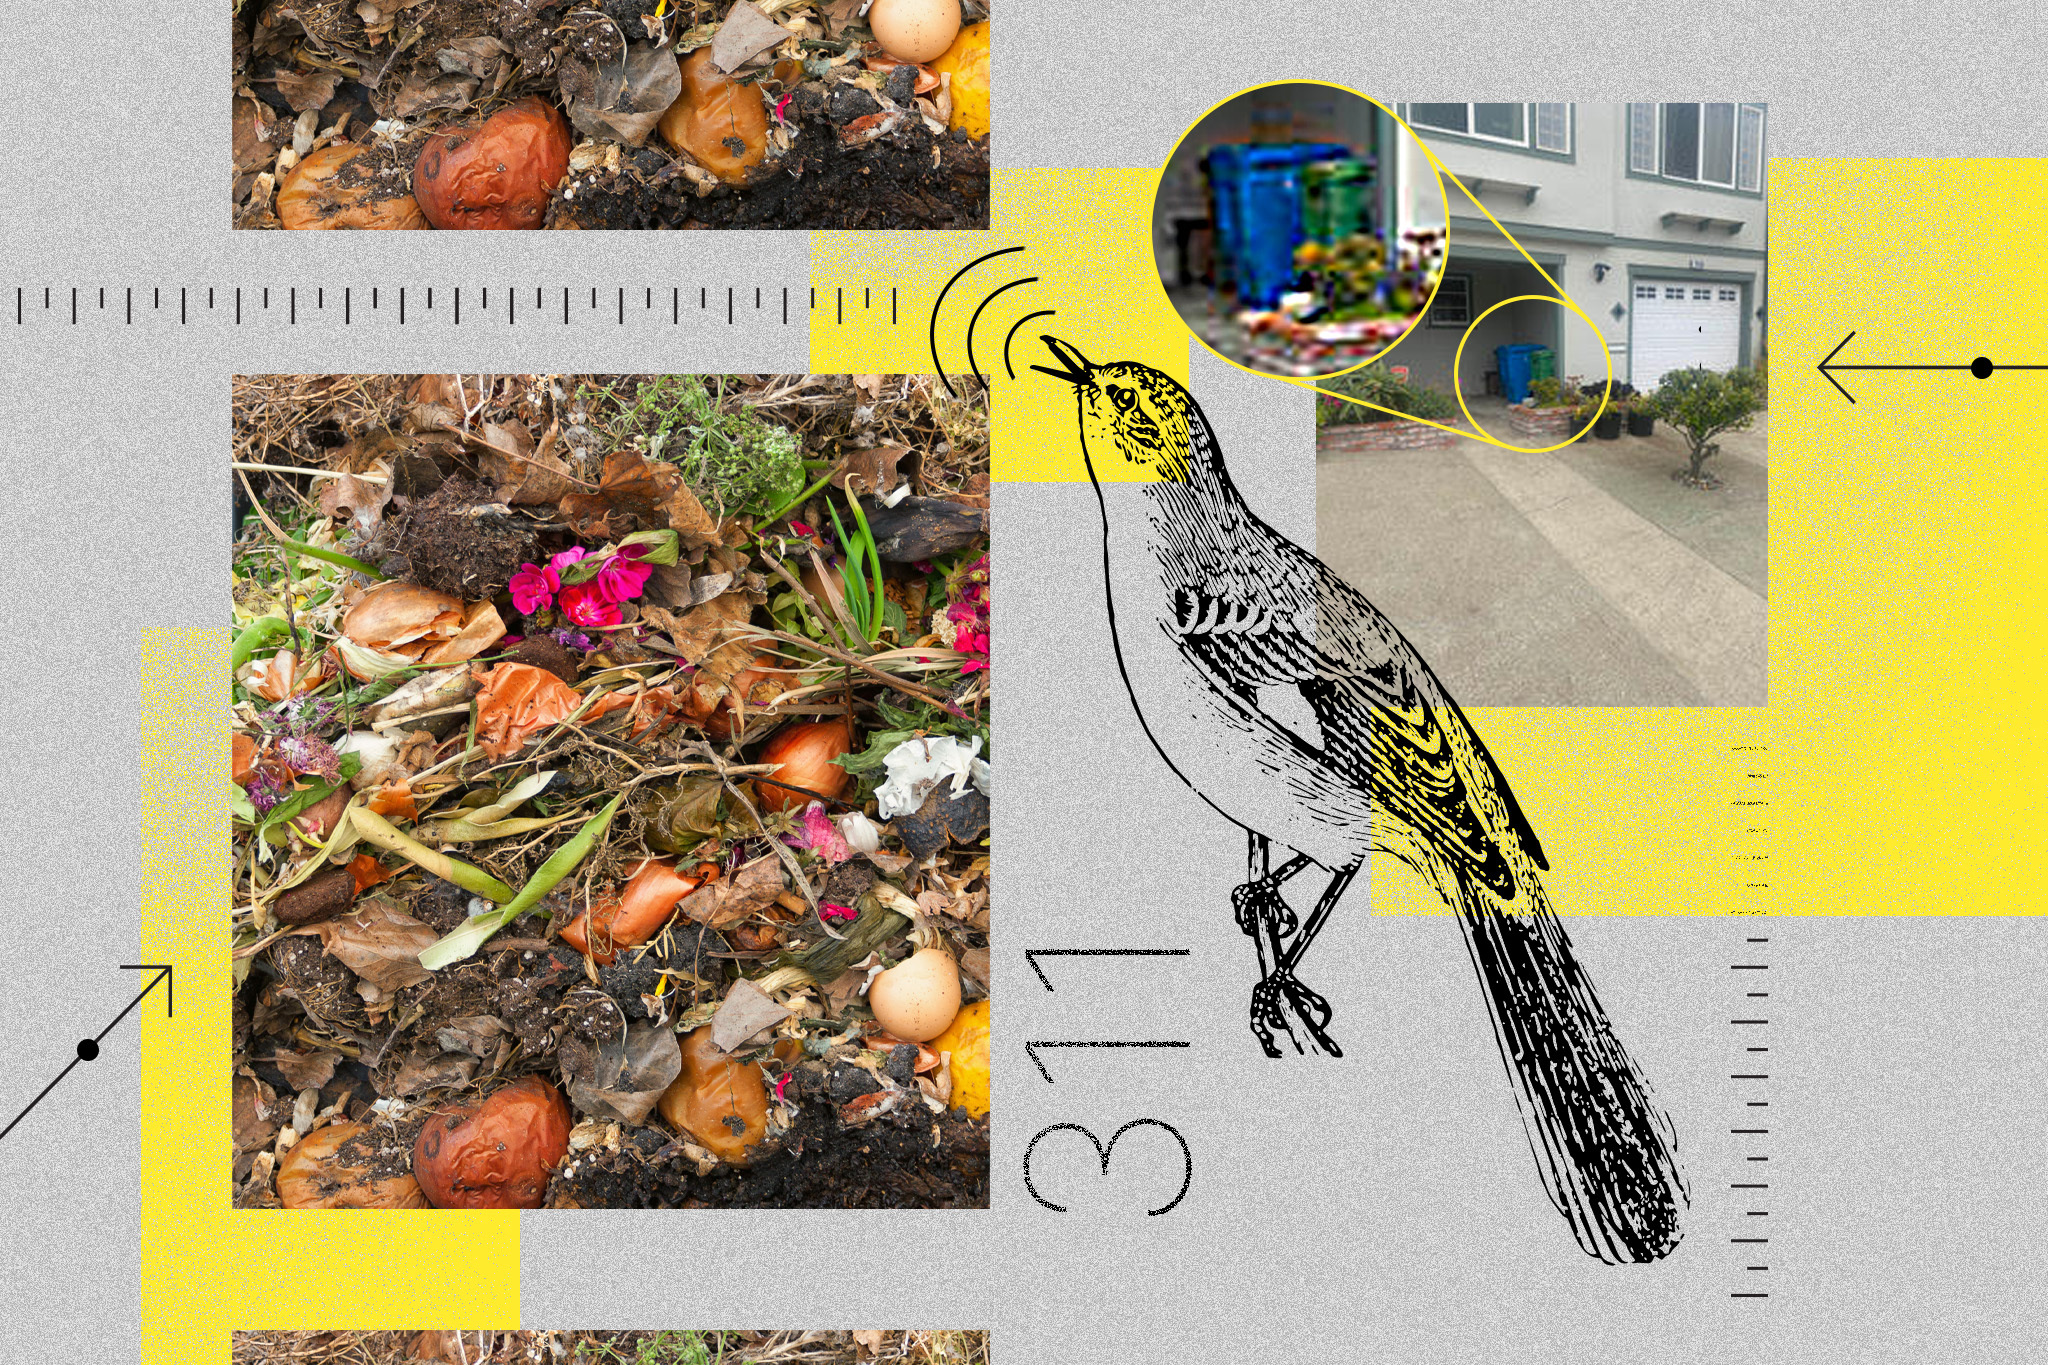 The image features a collage with photos of compost, an illustration of a bird, and an inset of bins outside a house, incorporating yellow highlights and graphic elements.